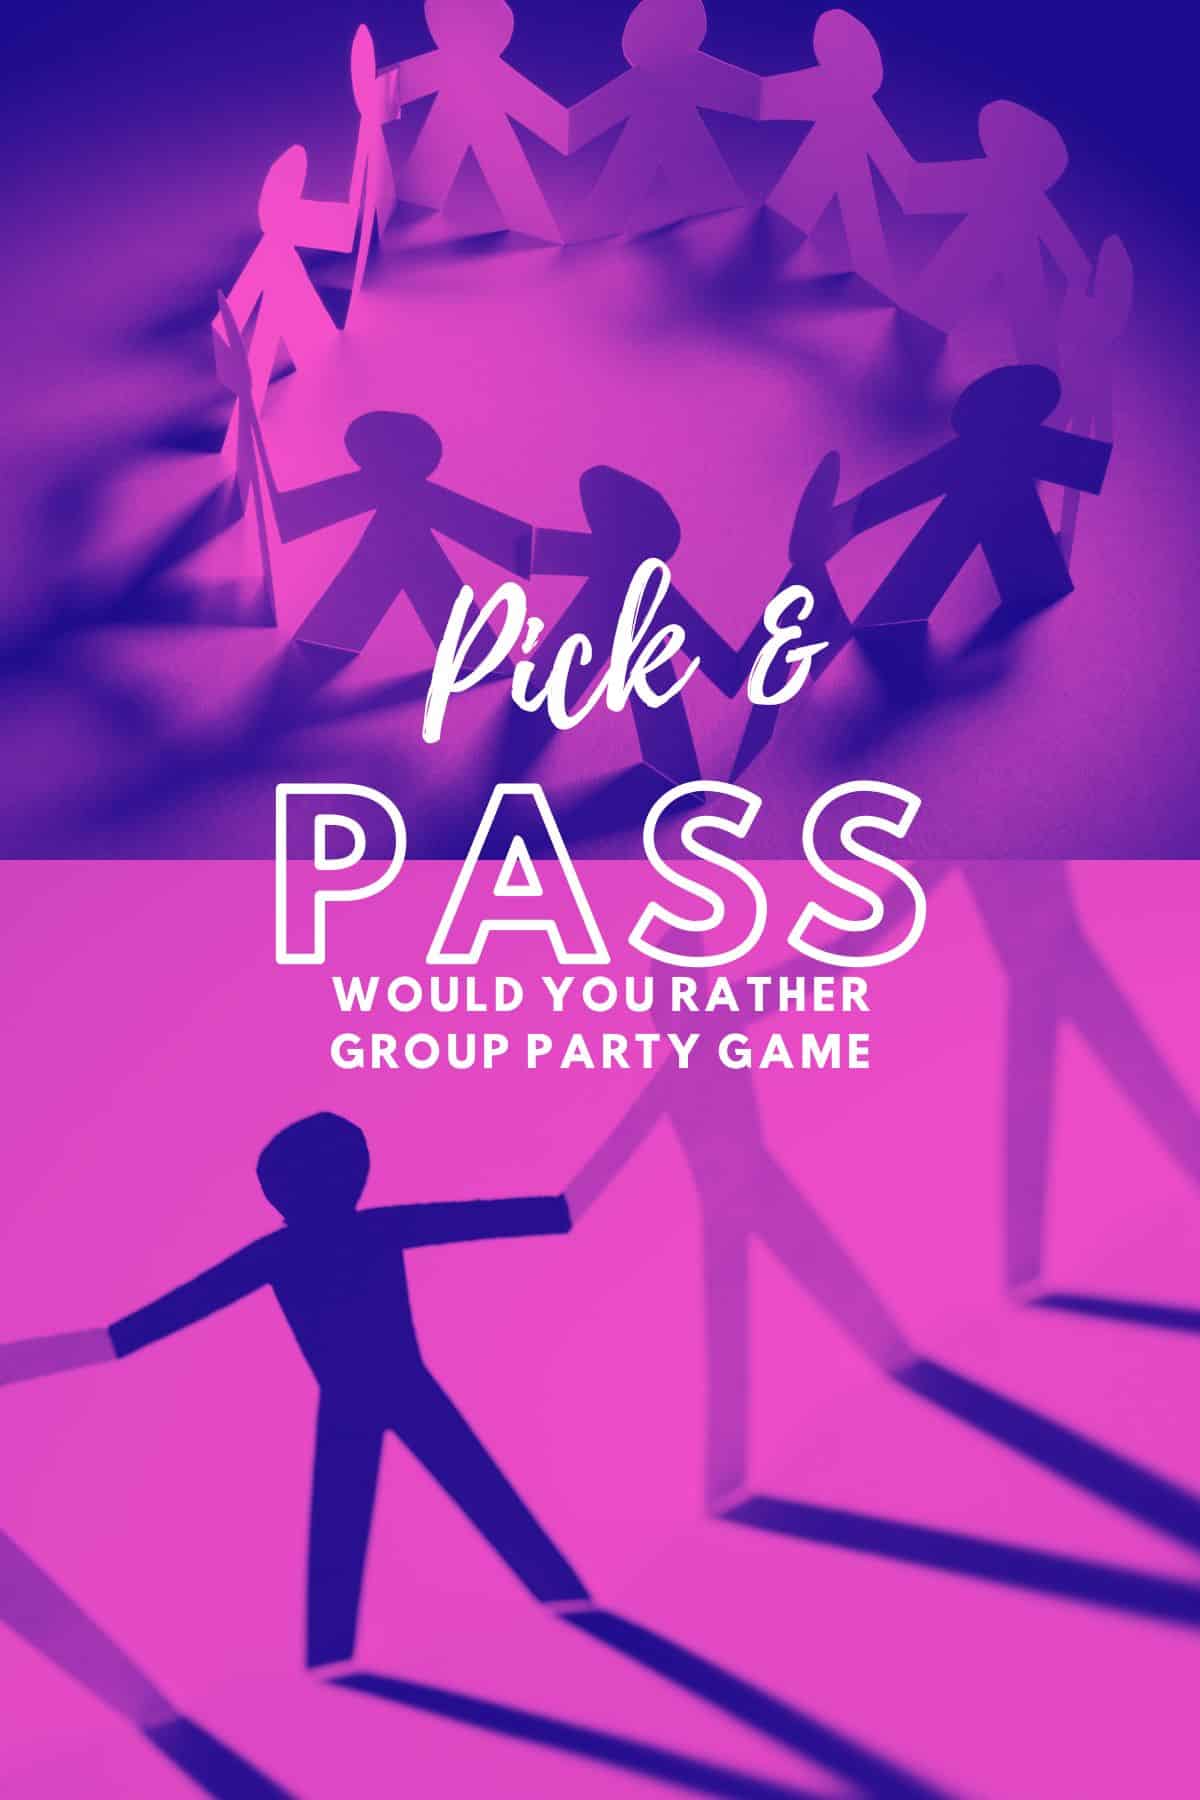 Paper people in a circle playing a Would You Rather group party game with the title Pick & Pass written on top.